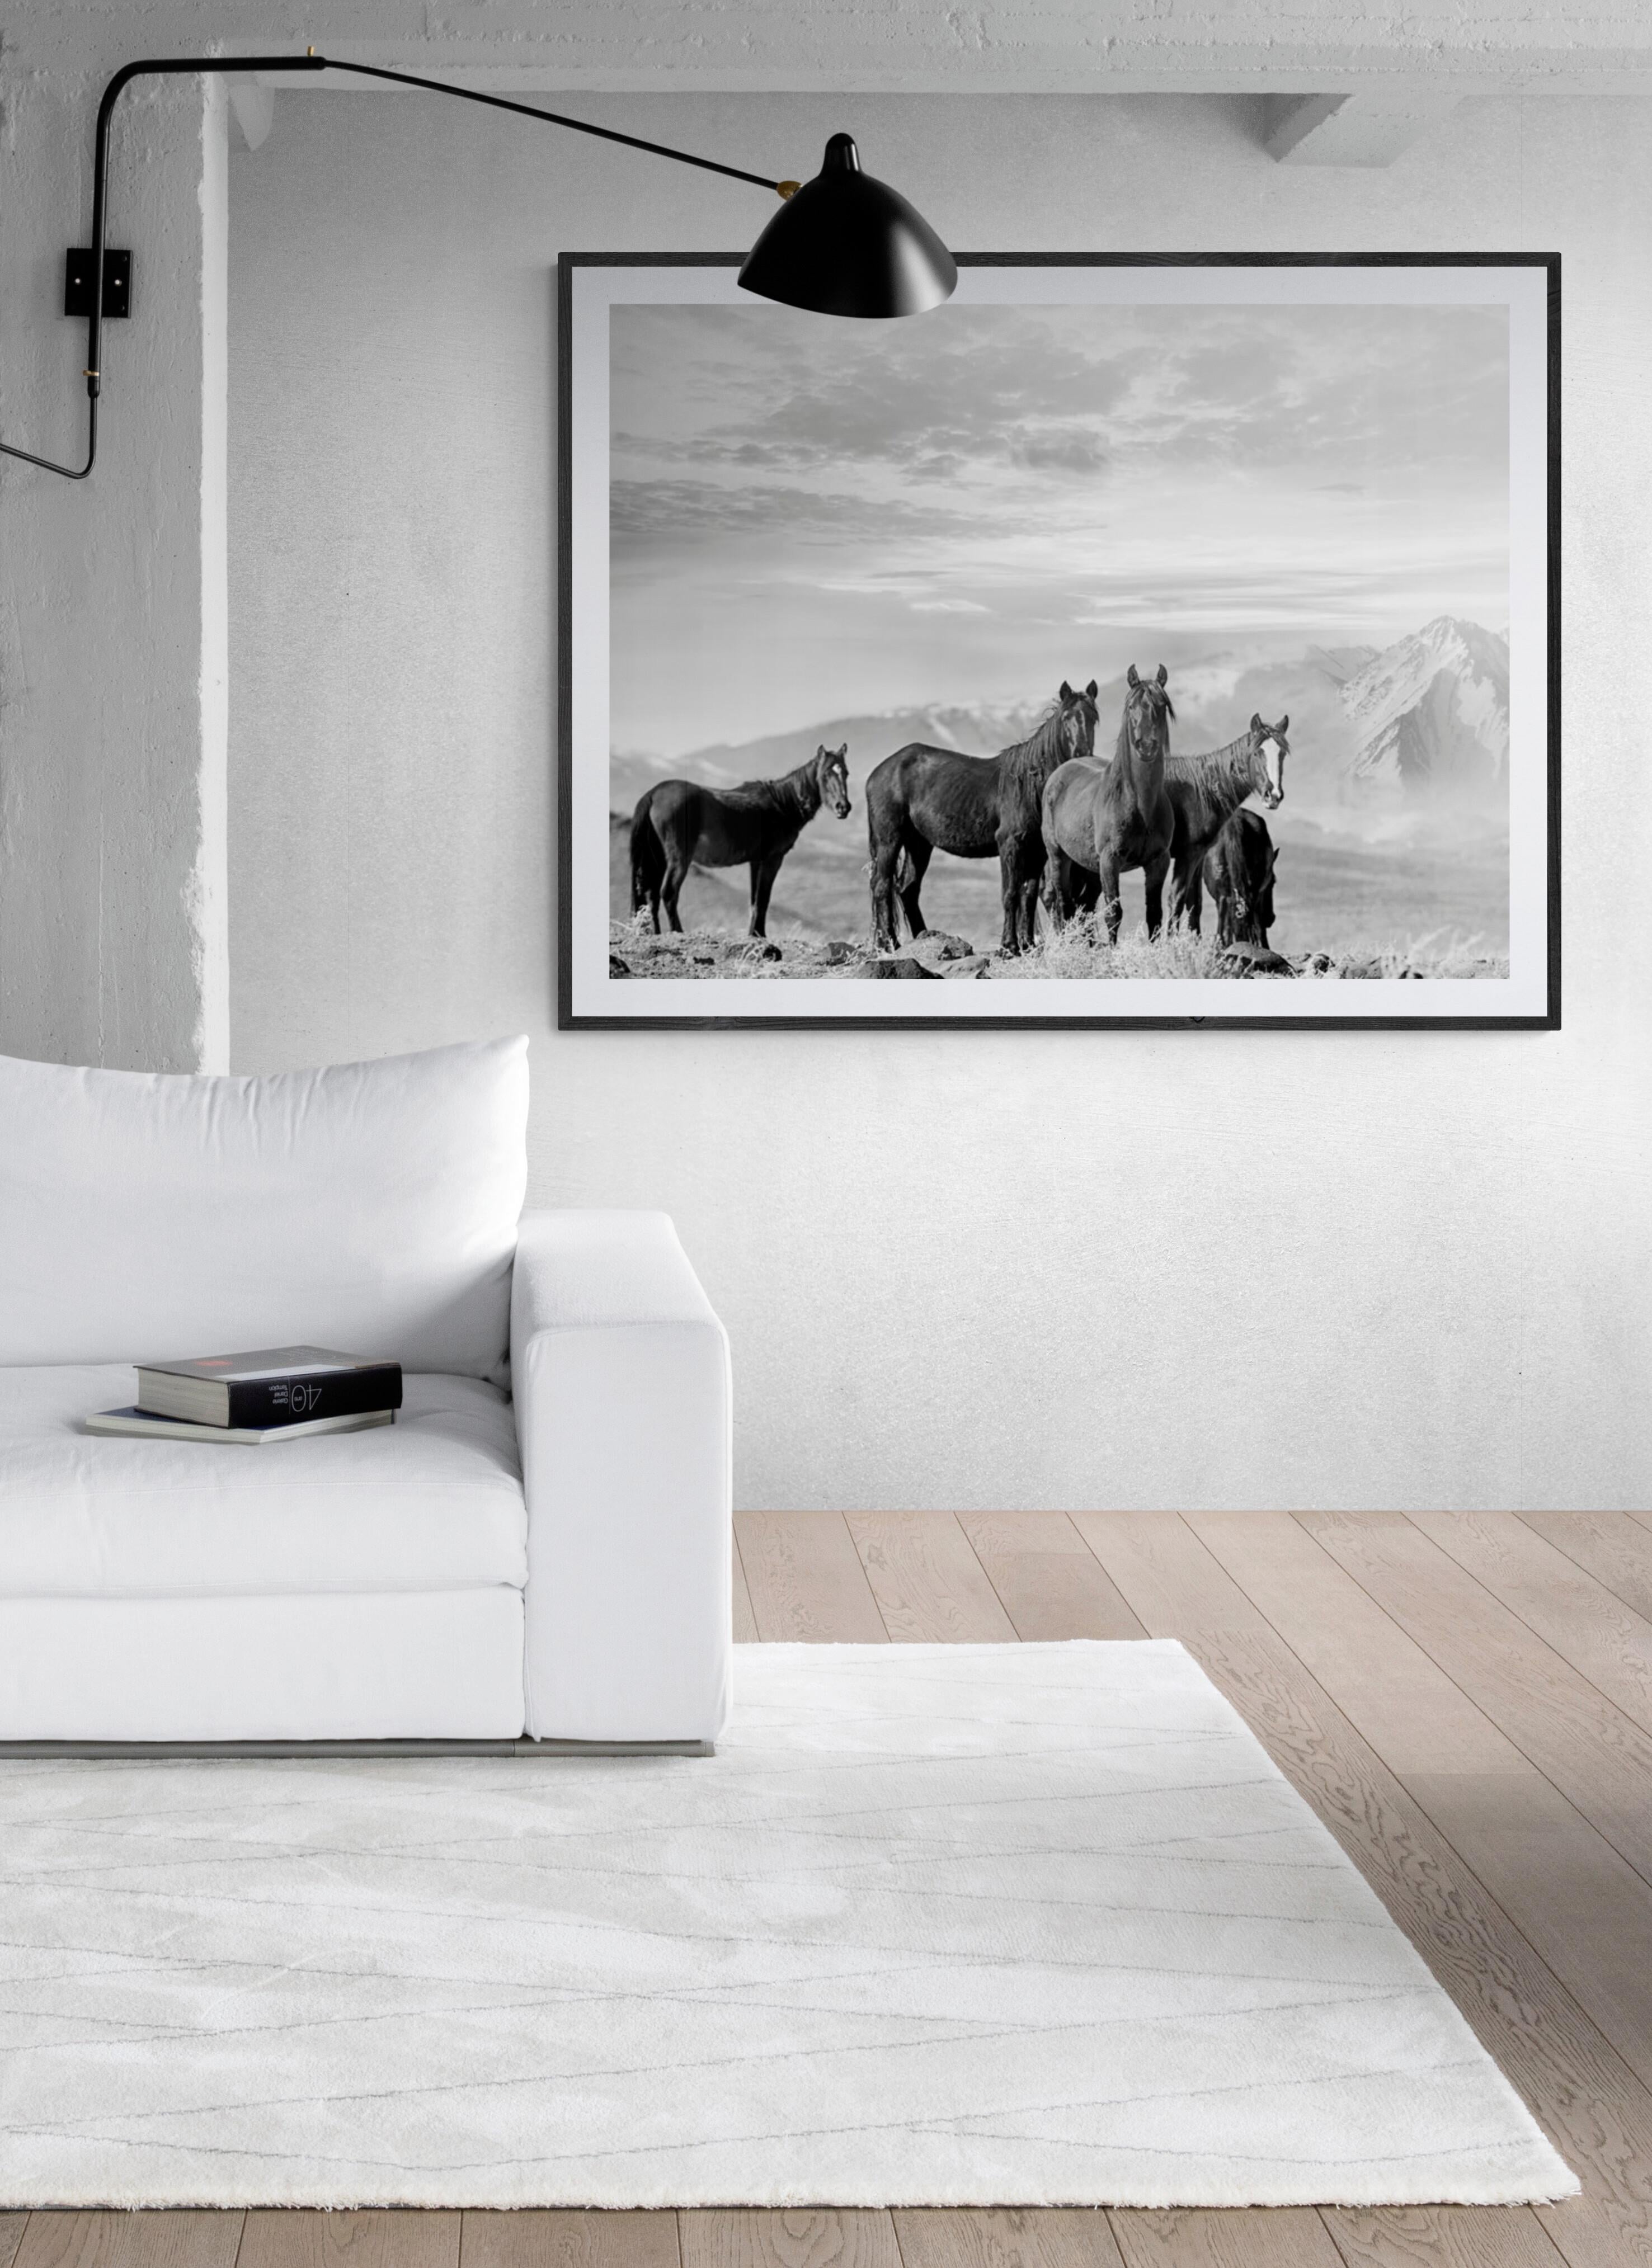 High Sierra Mustangs 36x48 Black & White Photography Wild Horses, Unsigned - Print by Shane Russeck